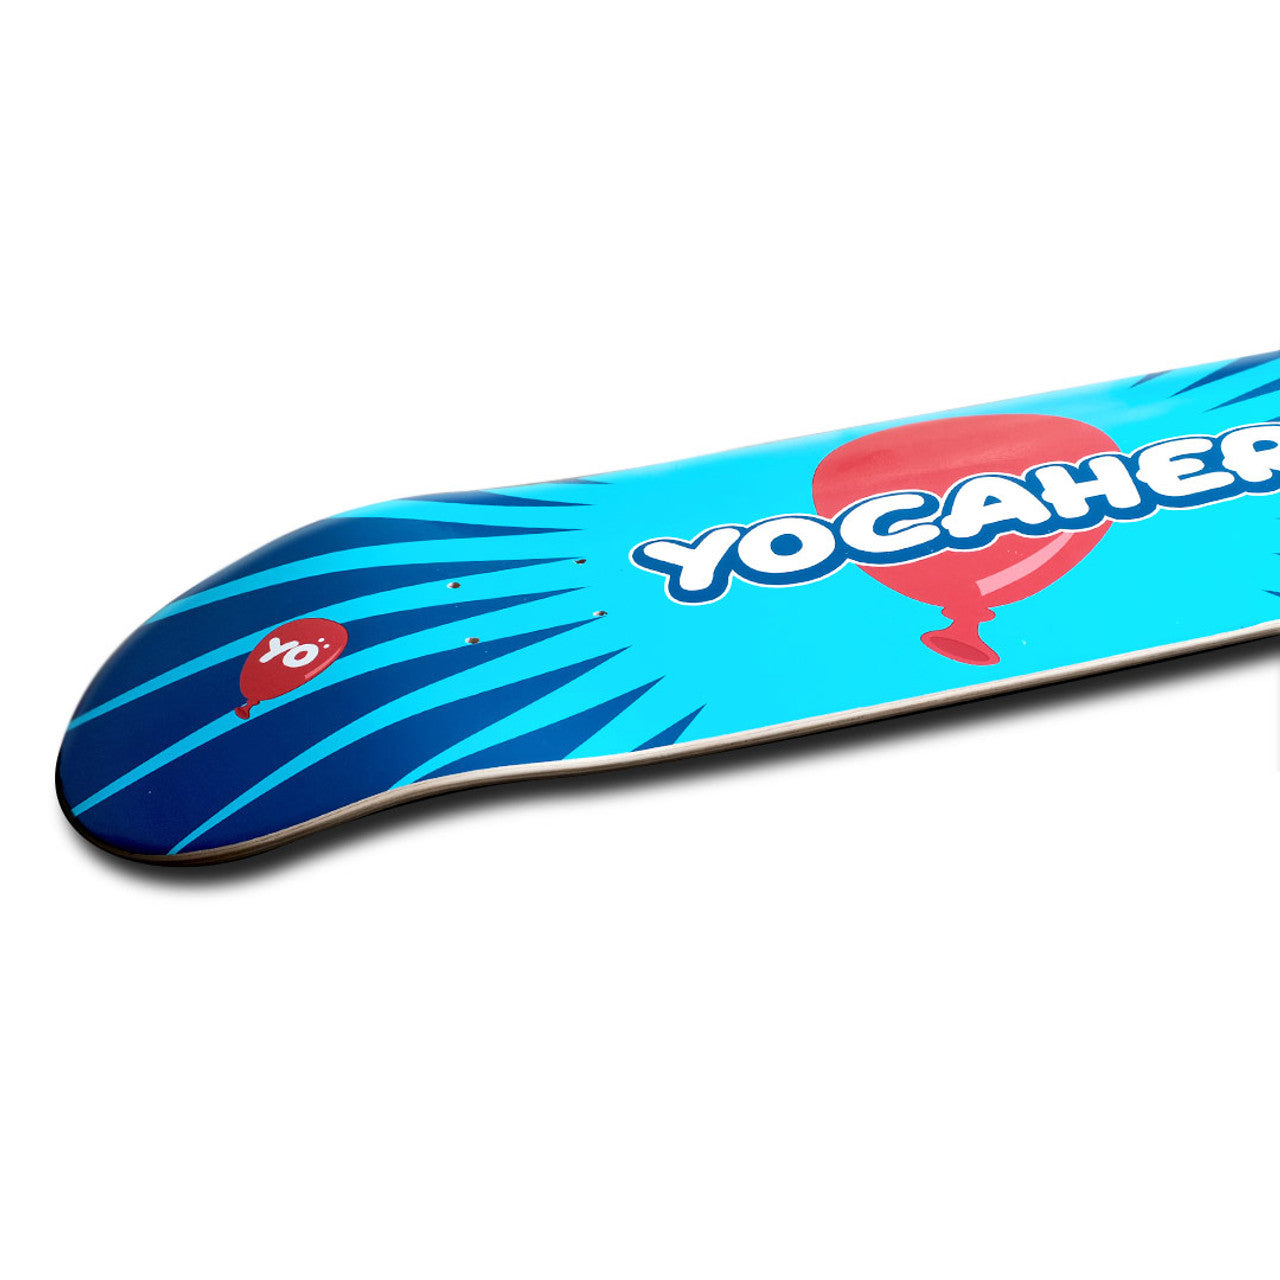 Yocaher Graphic Skateboard Deck  - CANDY Series - Pop